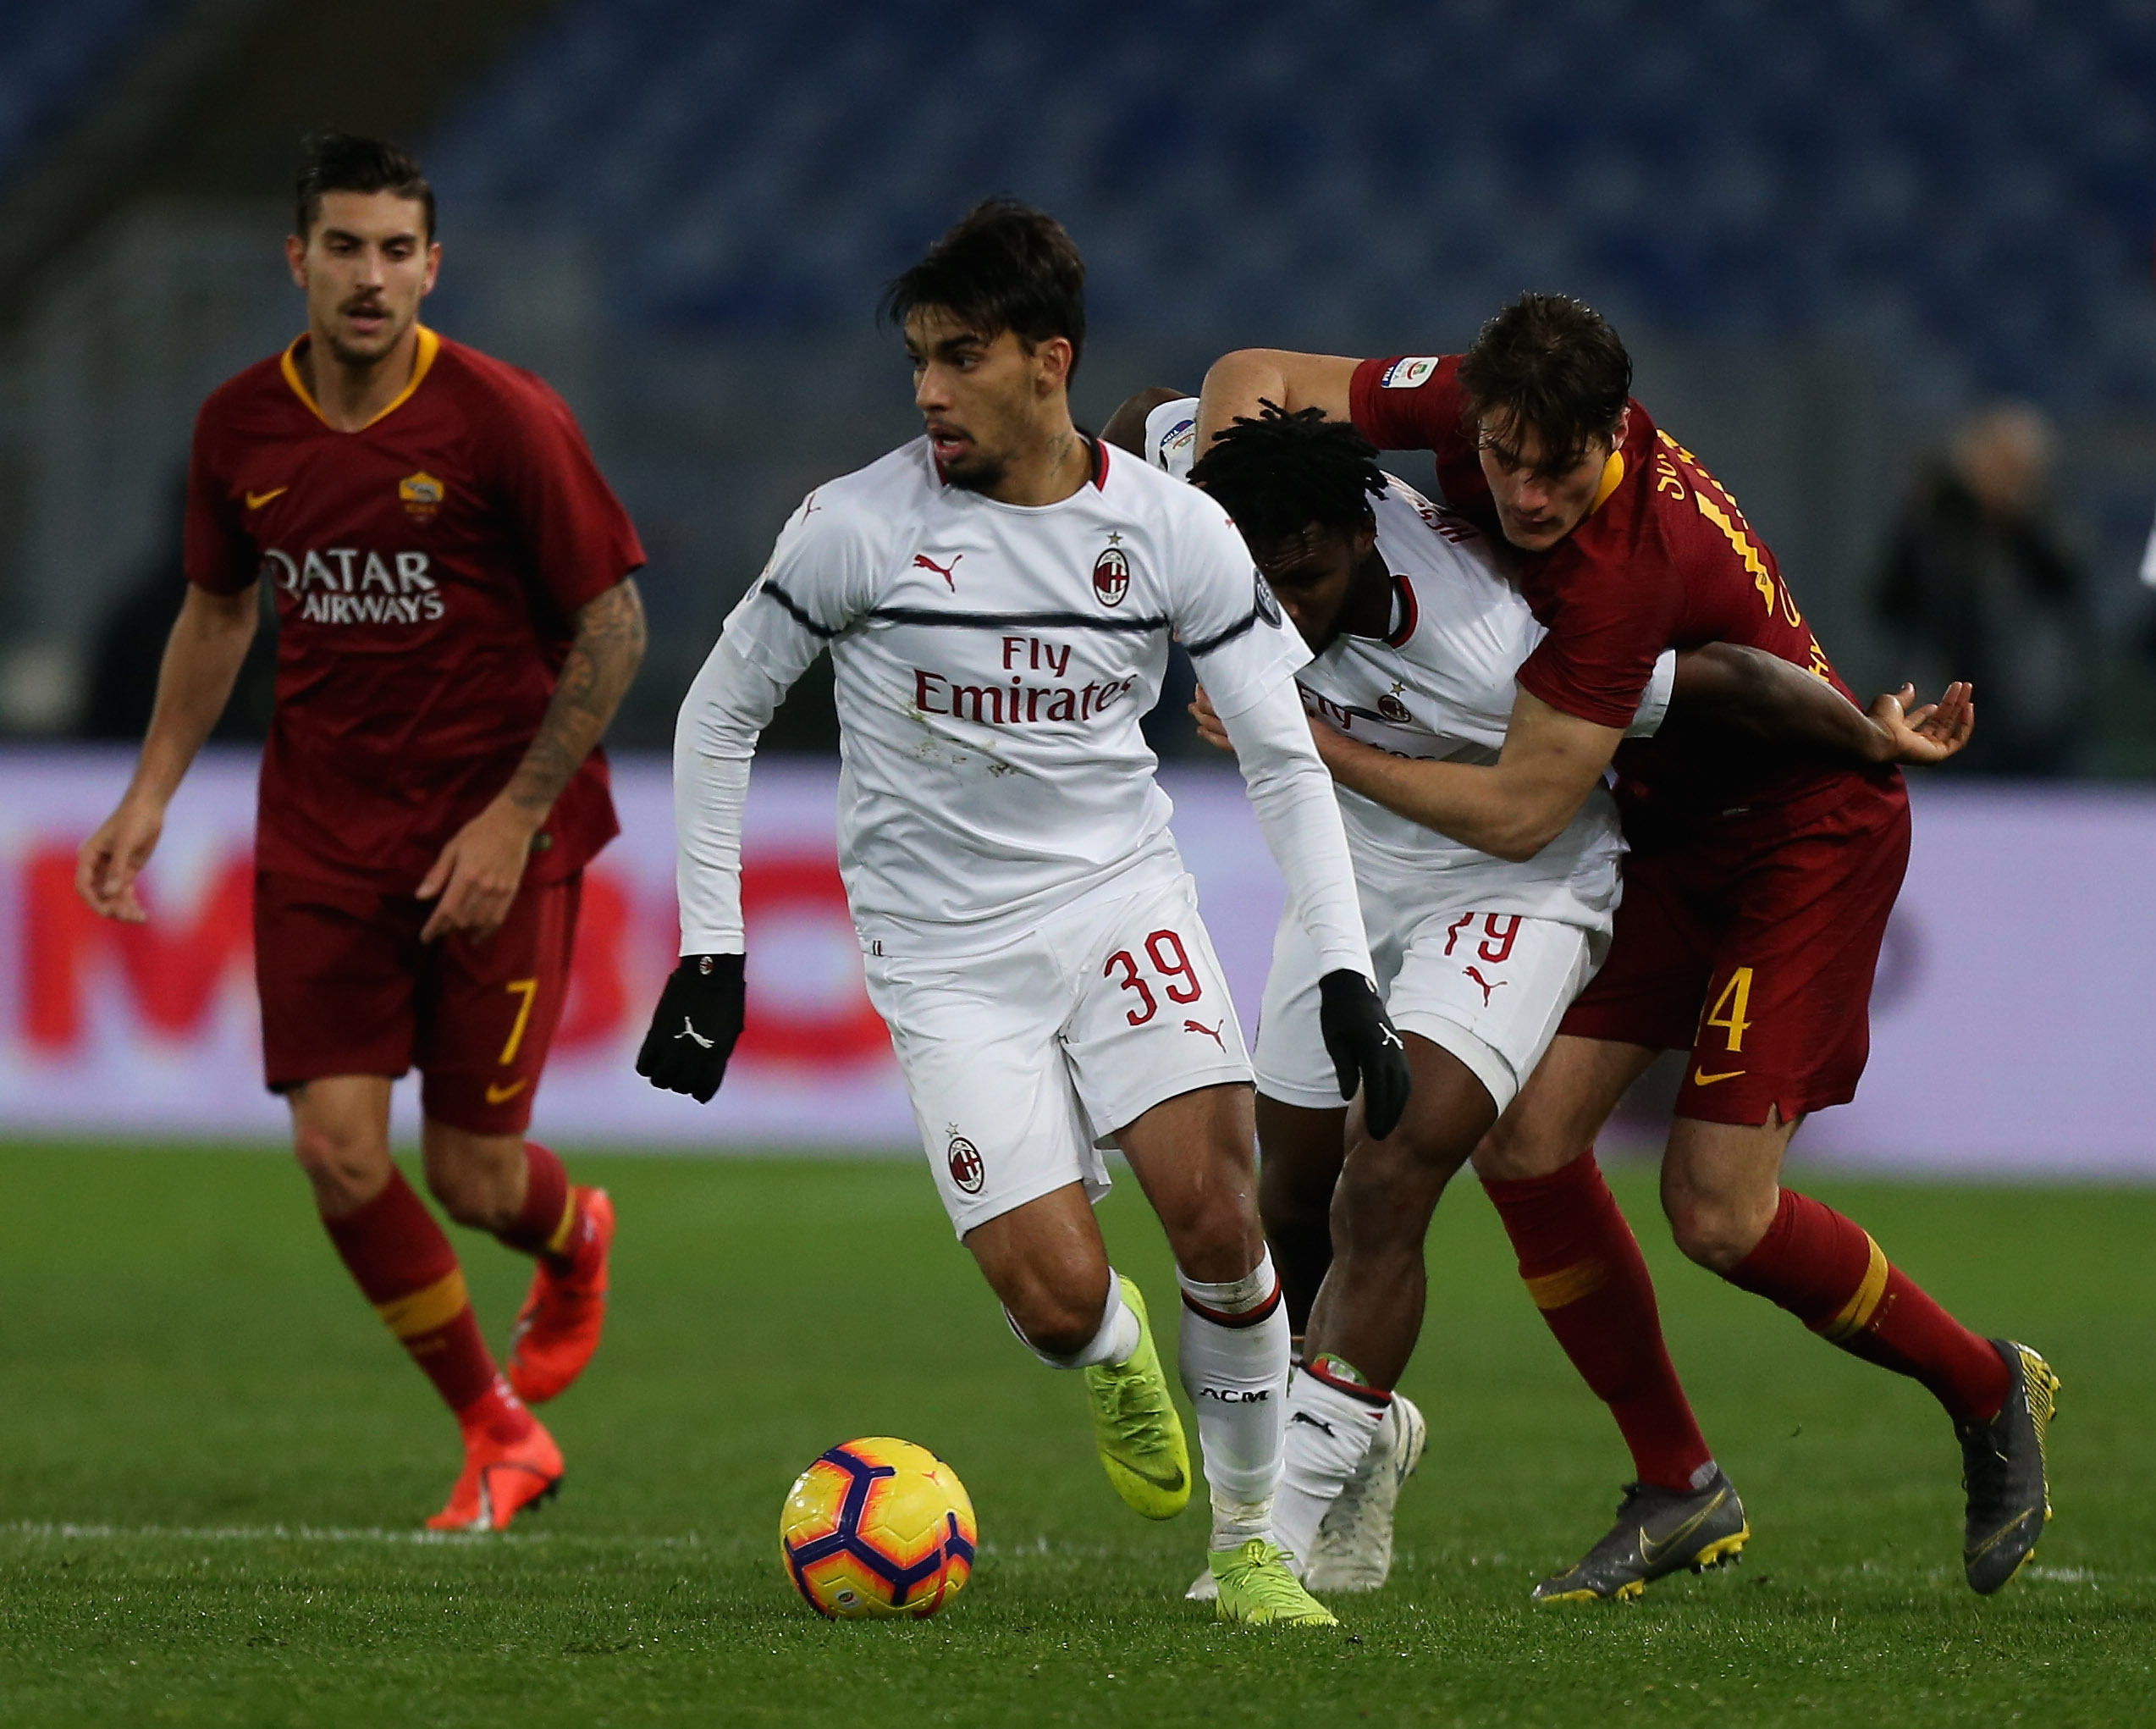 ROME, ITALY - FEBRUARY 03: Patrick Schick of AS Roma competes for the ball with Franck Kessie and Lucas Paqueta of AC Milan during the Serie A match between AS Roma and AC Milan at Stadio Olimpico on February 3, 2019 in Rome, Italy. (Photo by Paolo Bruno/Getty Images)